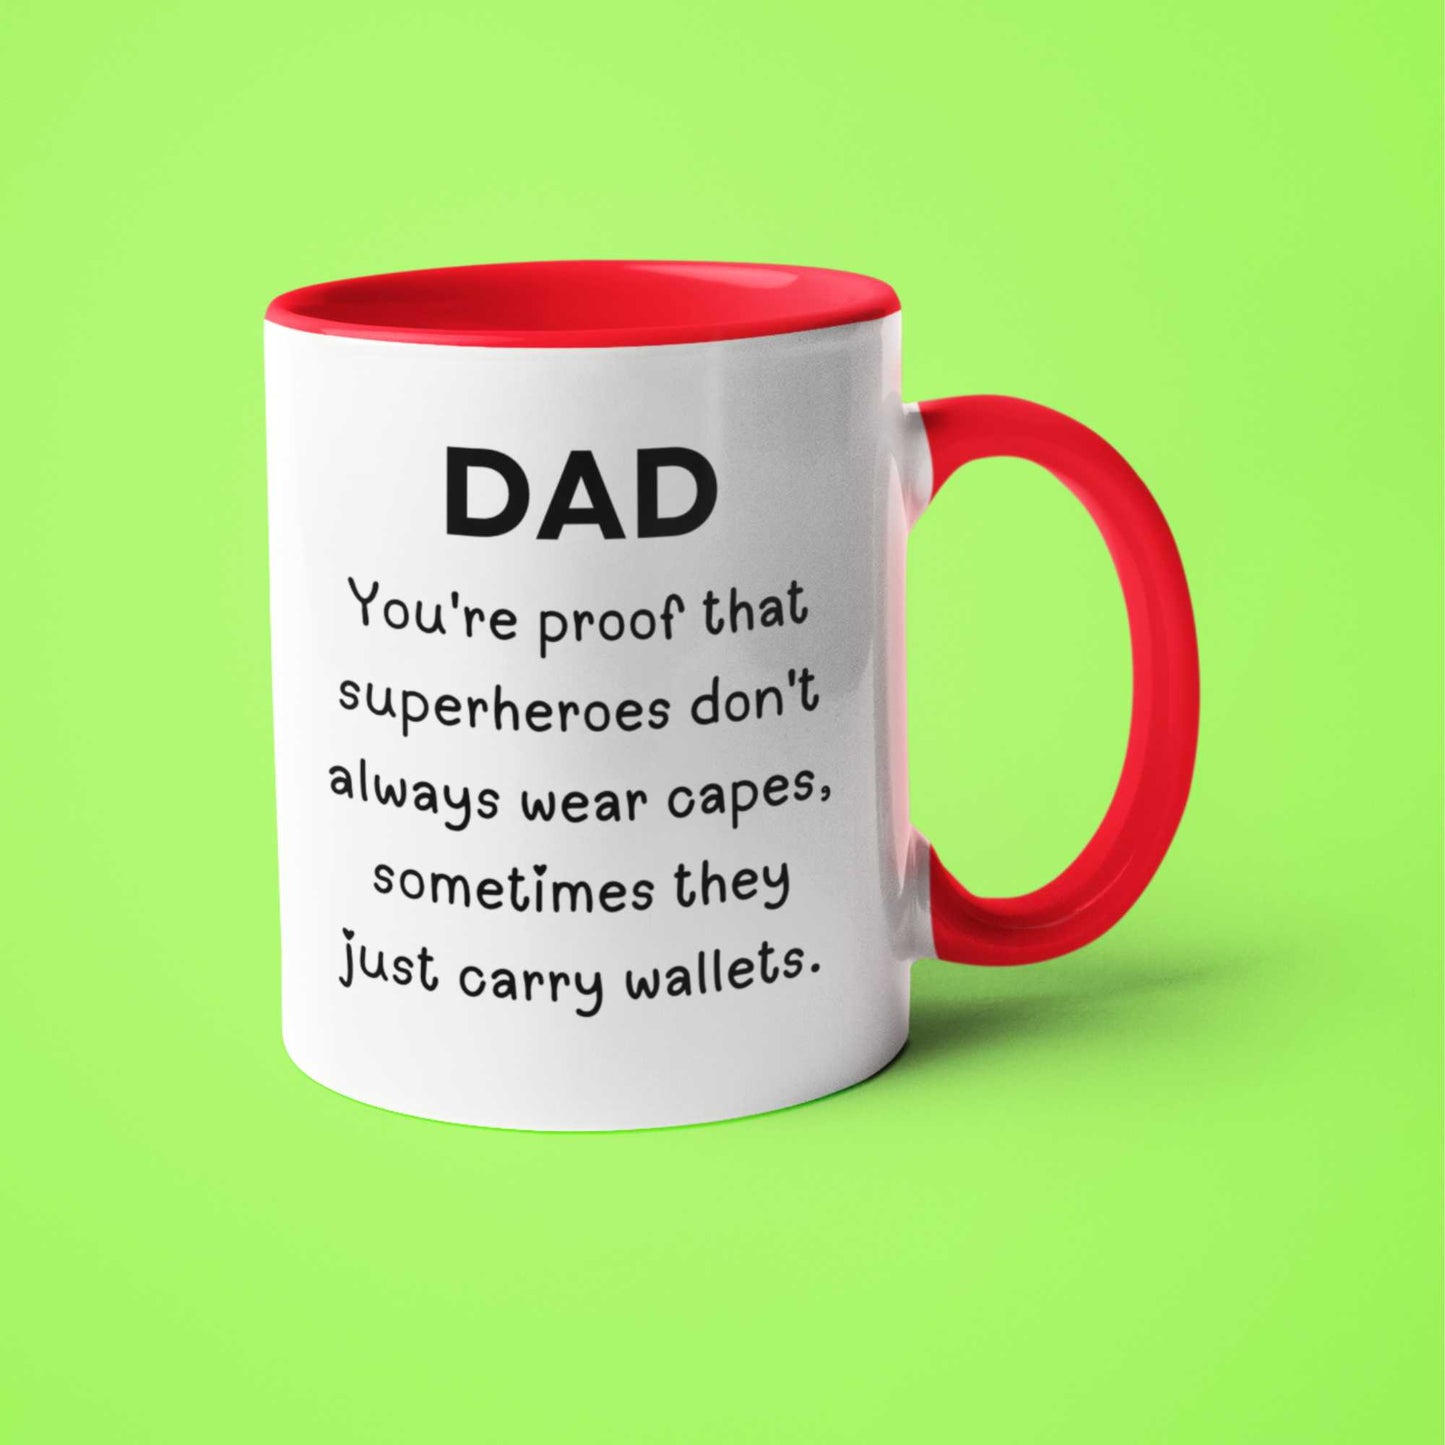 Funny Dad Superheroes capes Just Carry Wallets Mug for Fathers Day Birthday or Christmas Gift